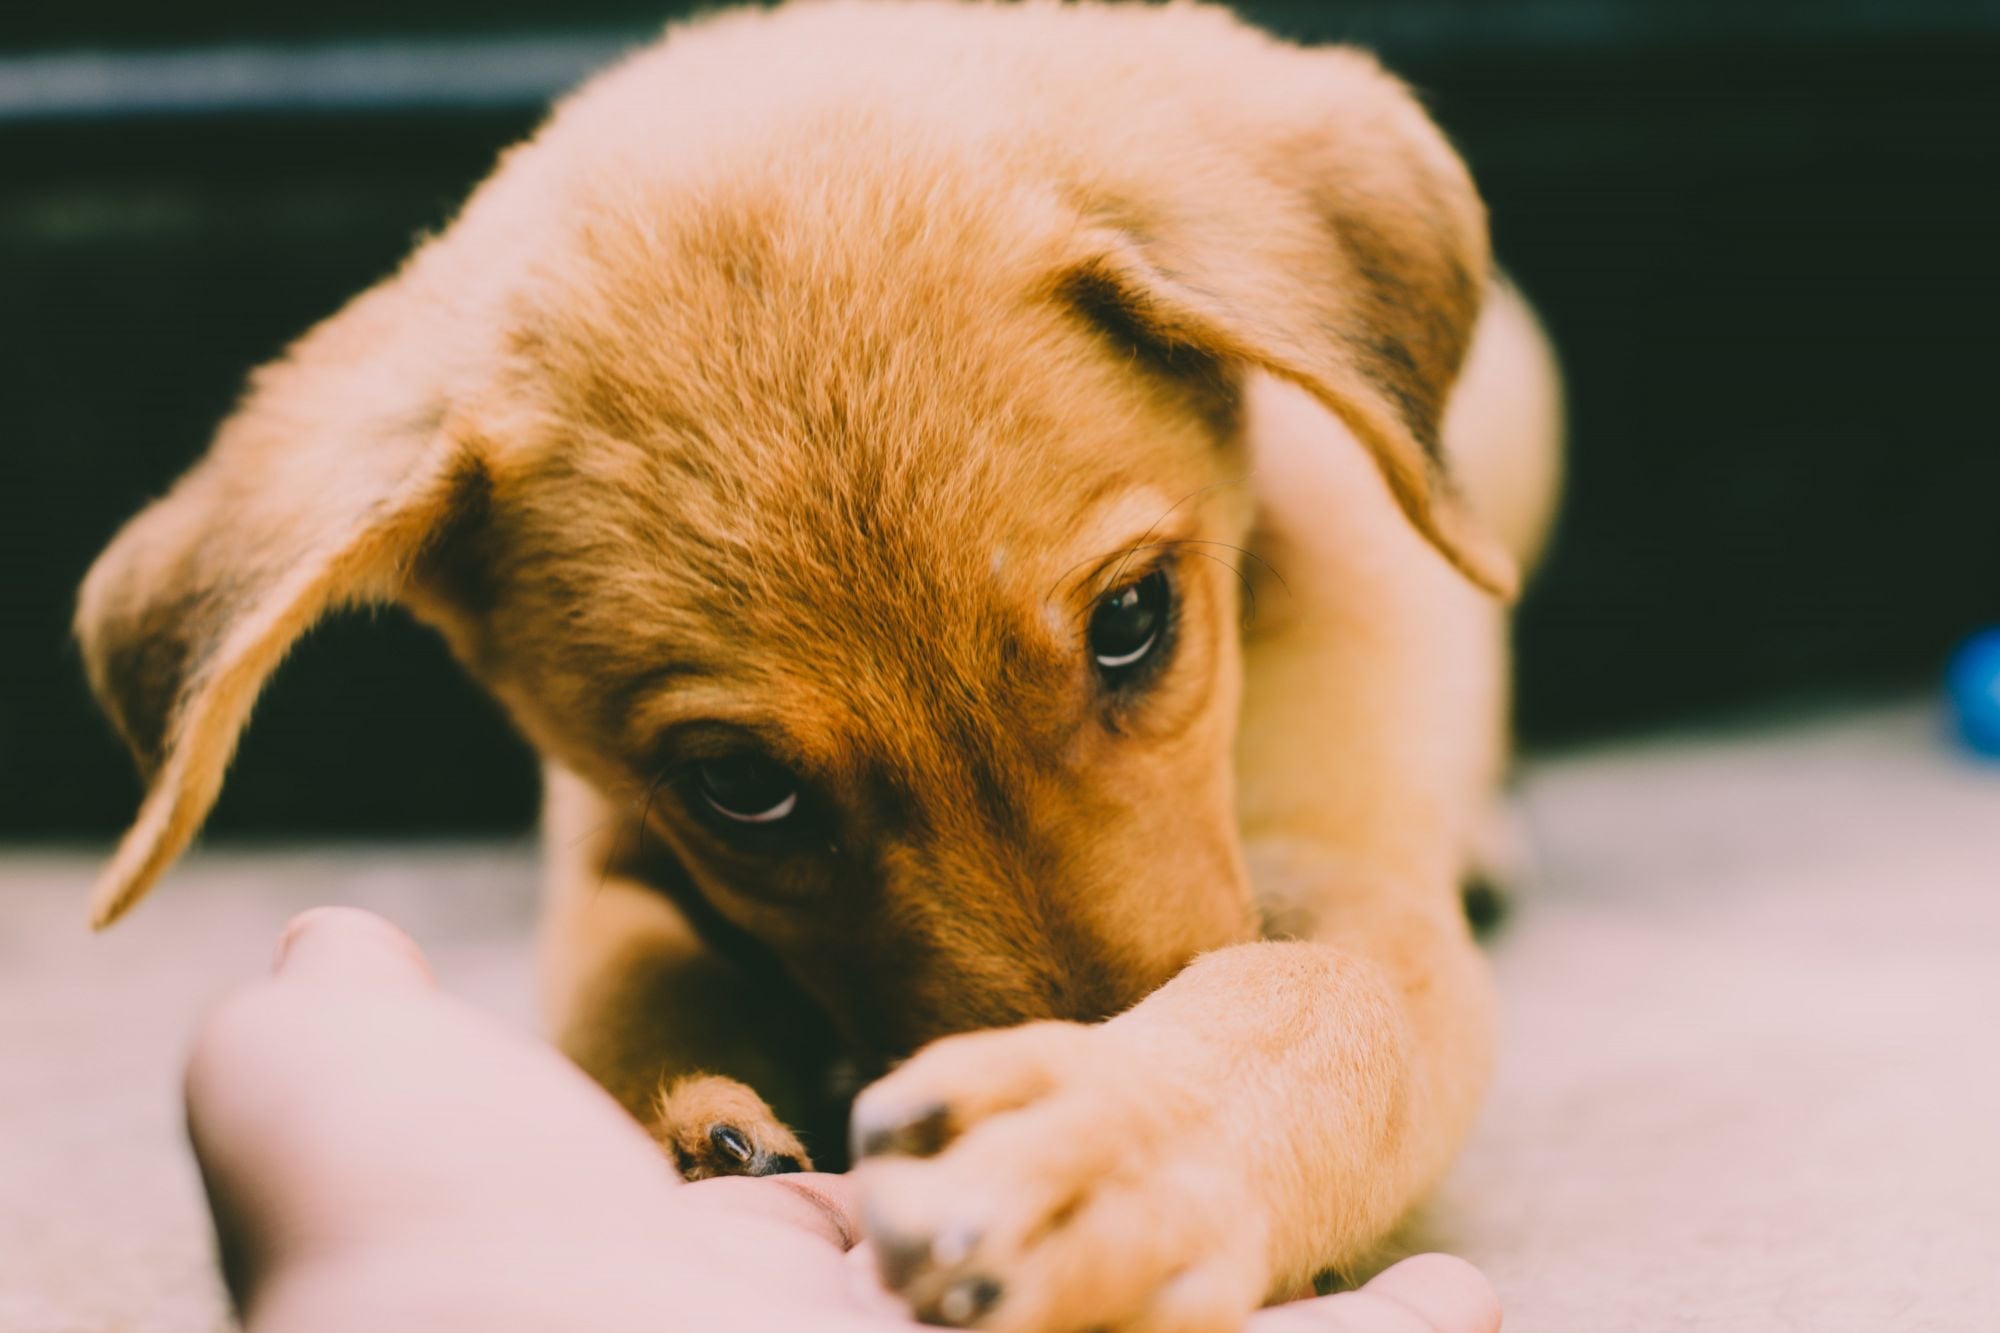 Your Puppy's Hygiene Isn't That Important